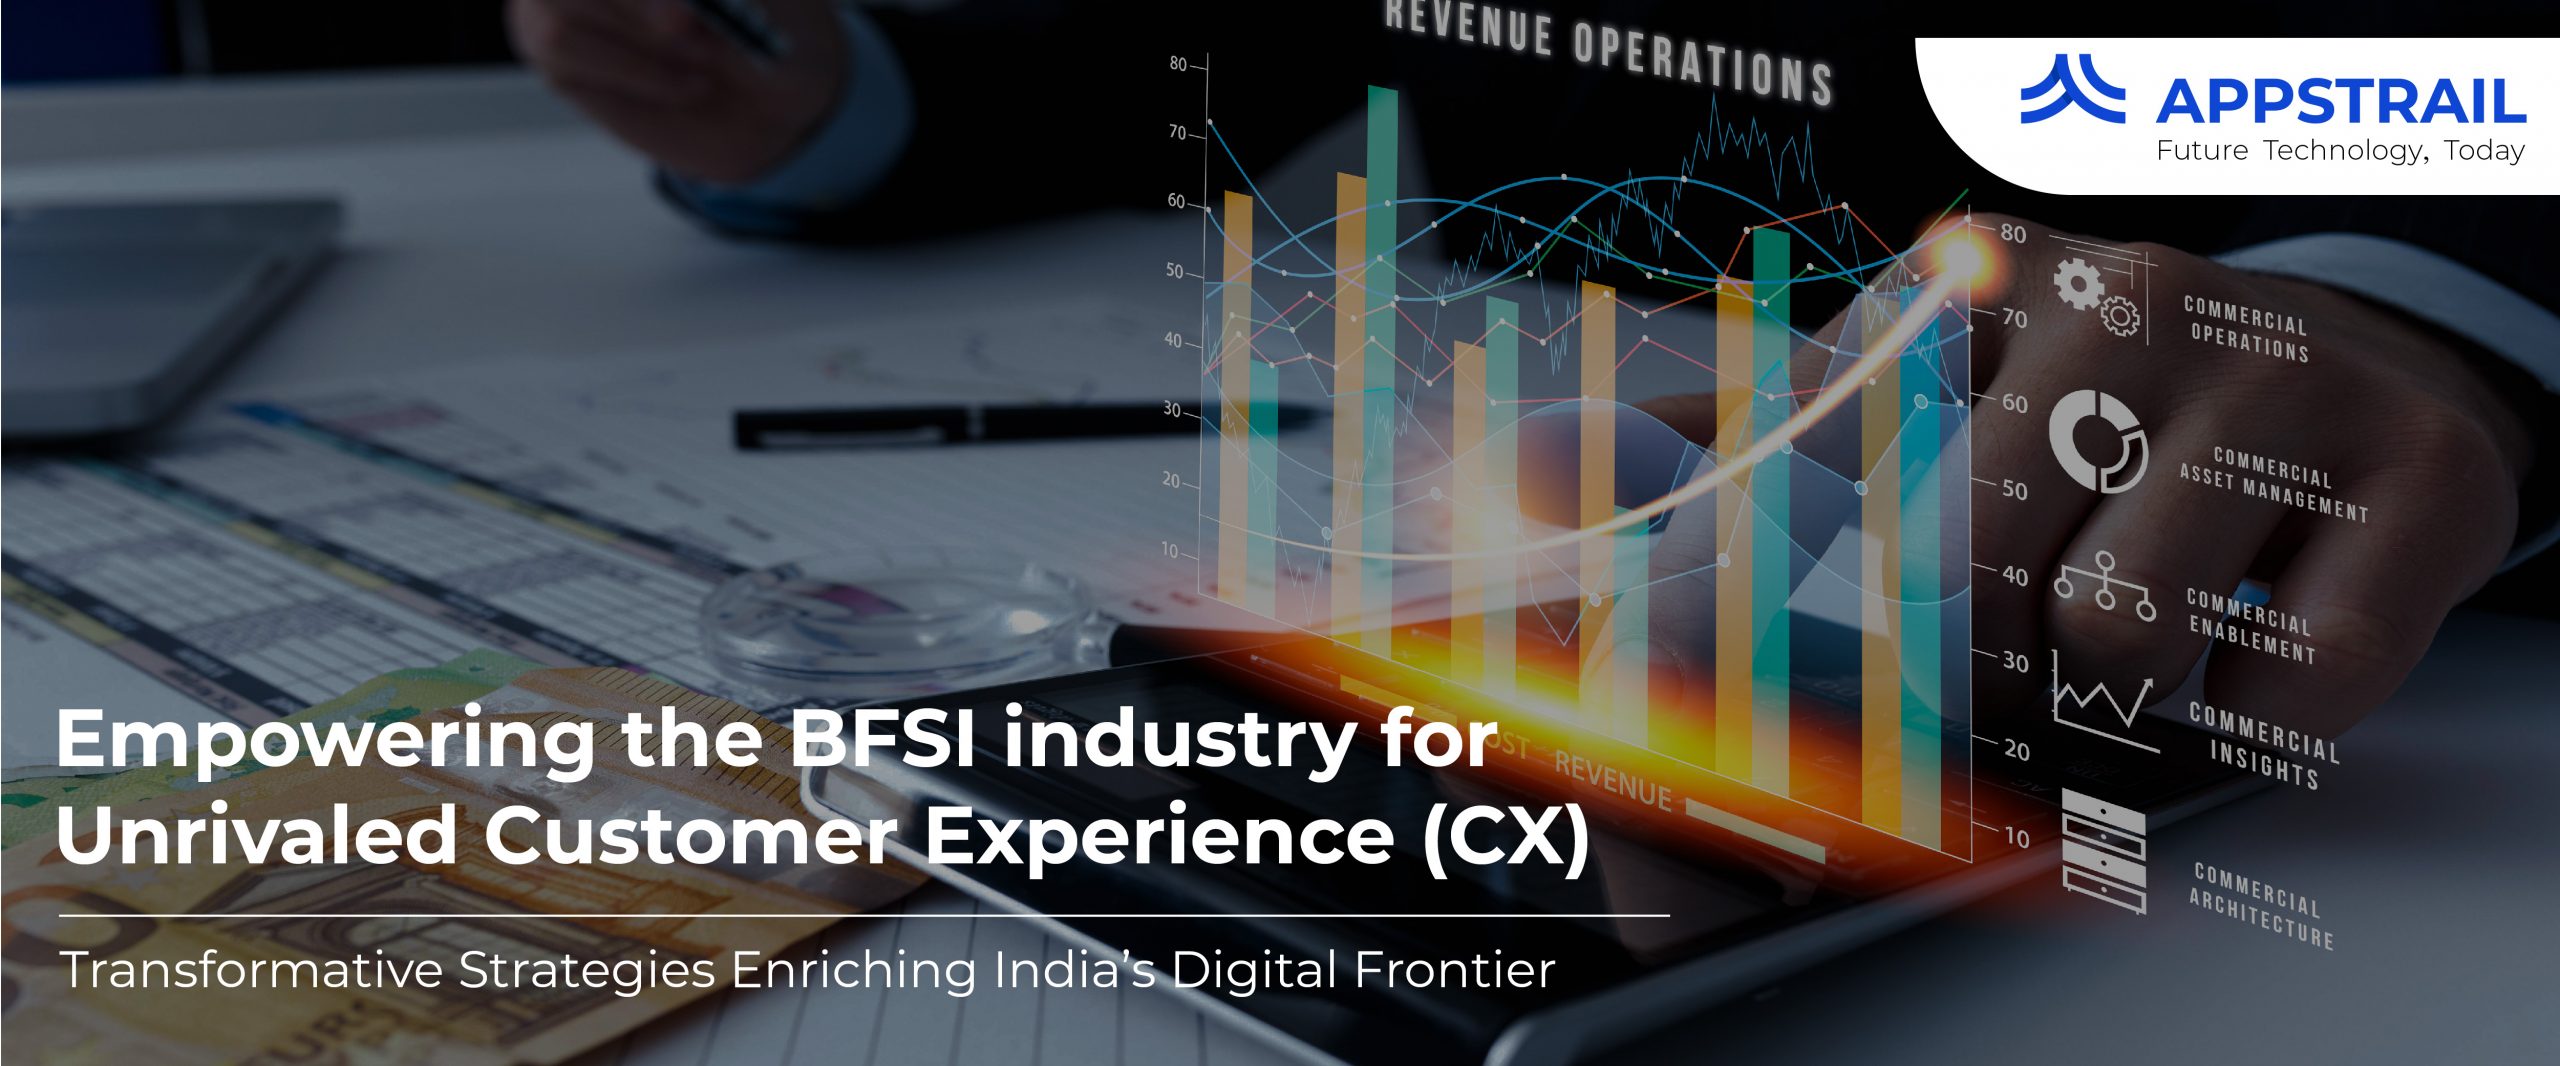 Empowering the BFSI industry for Unrivaled Customer Experience (CX)